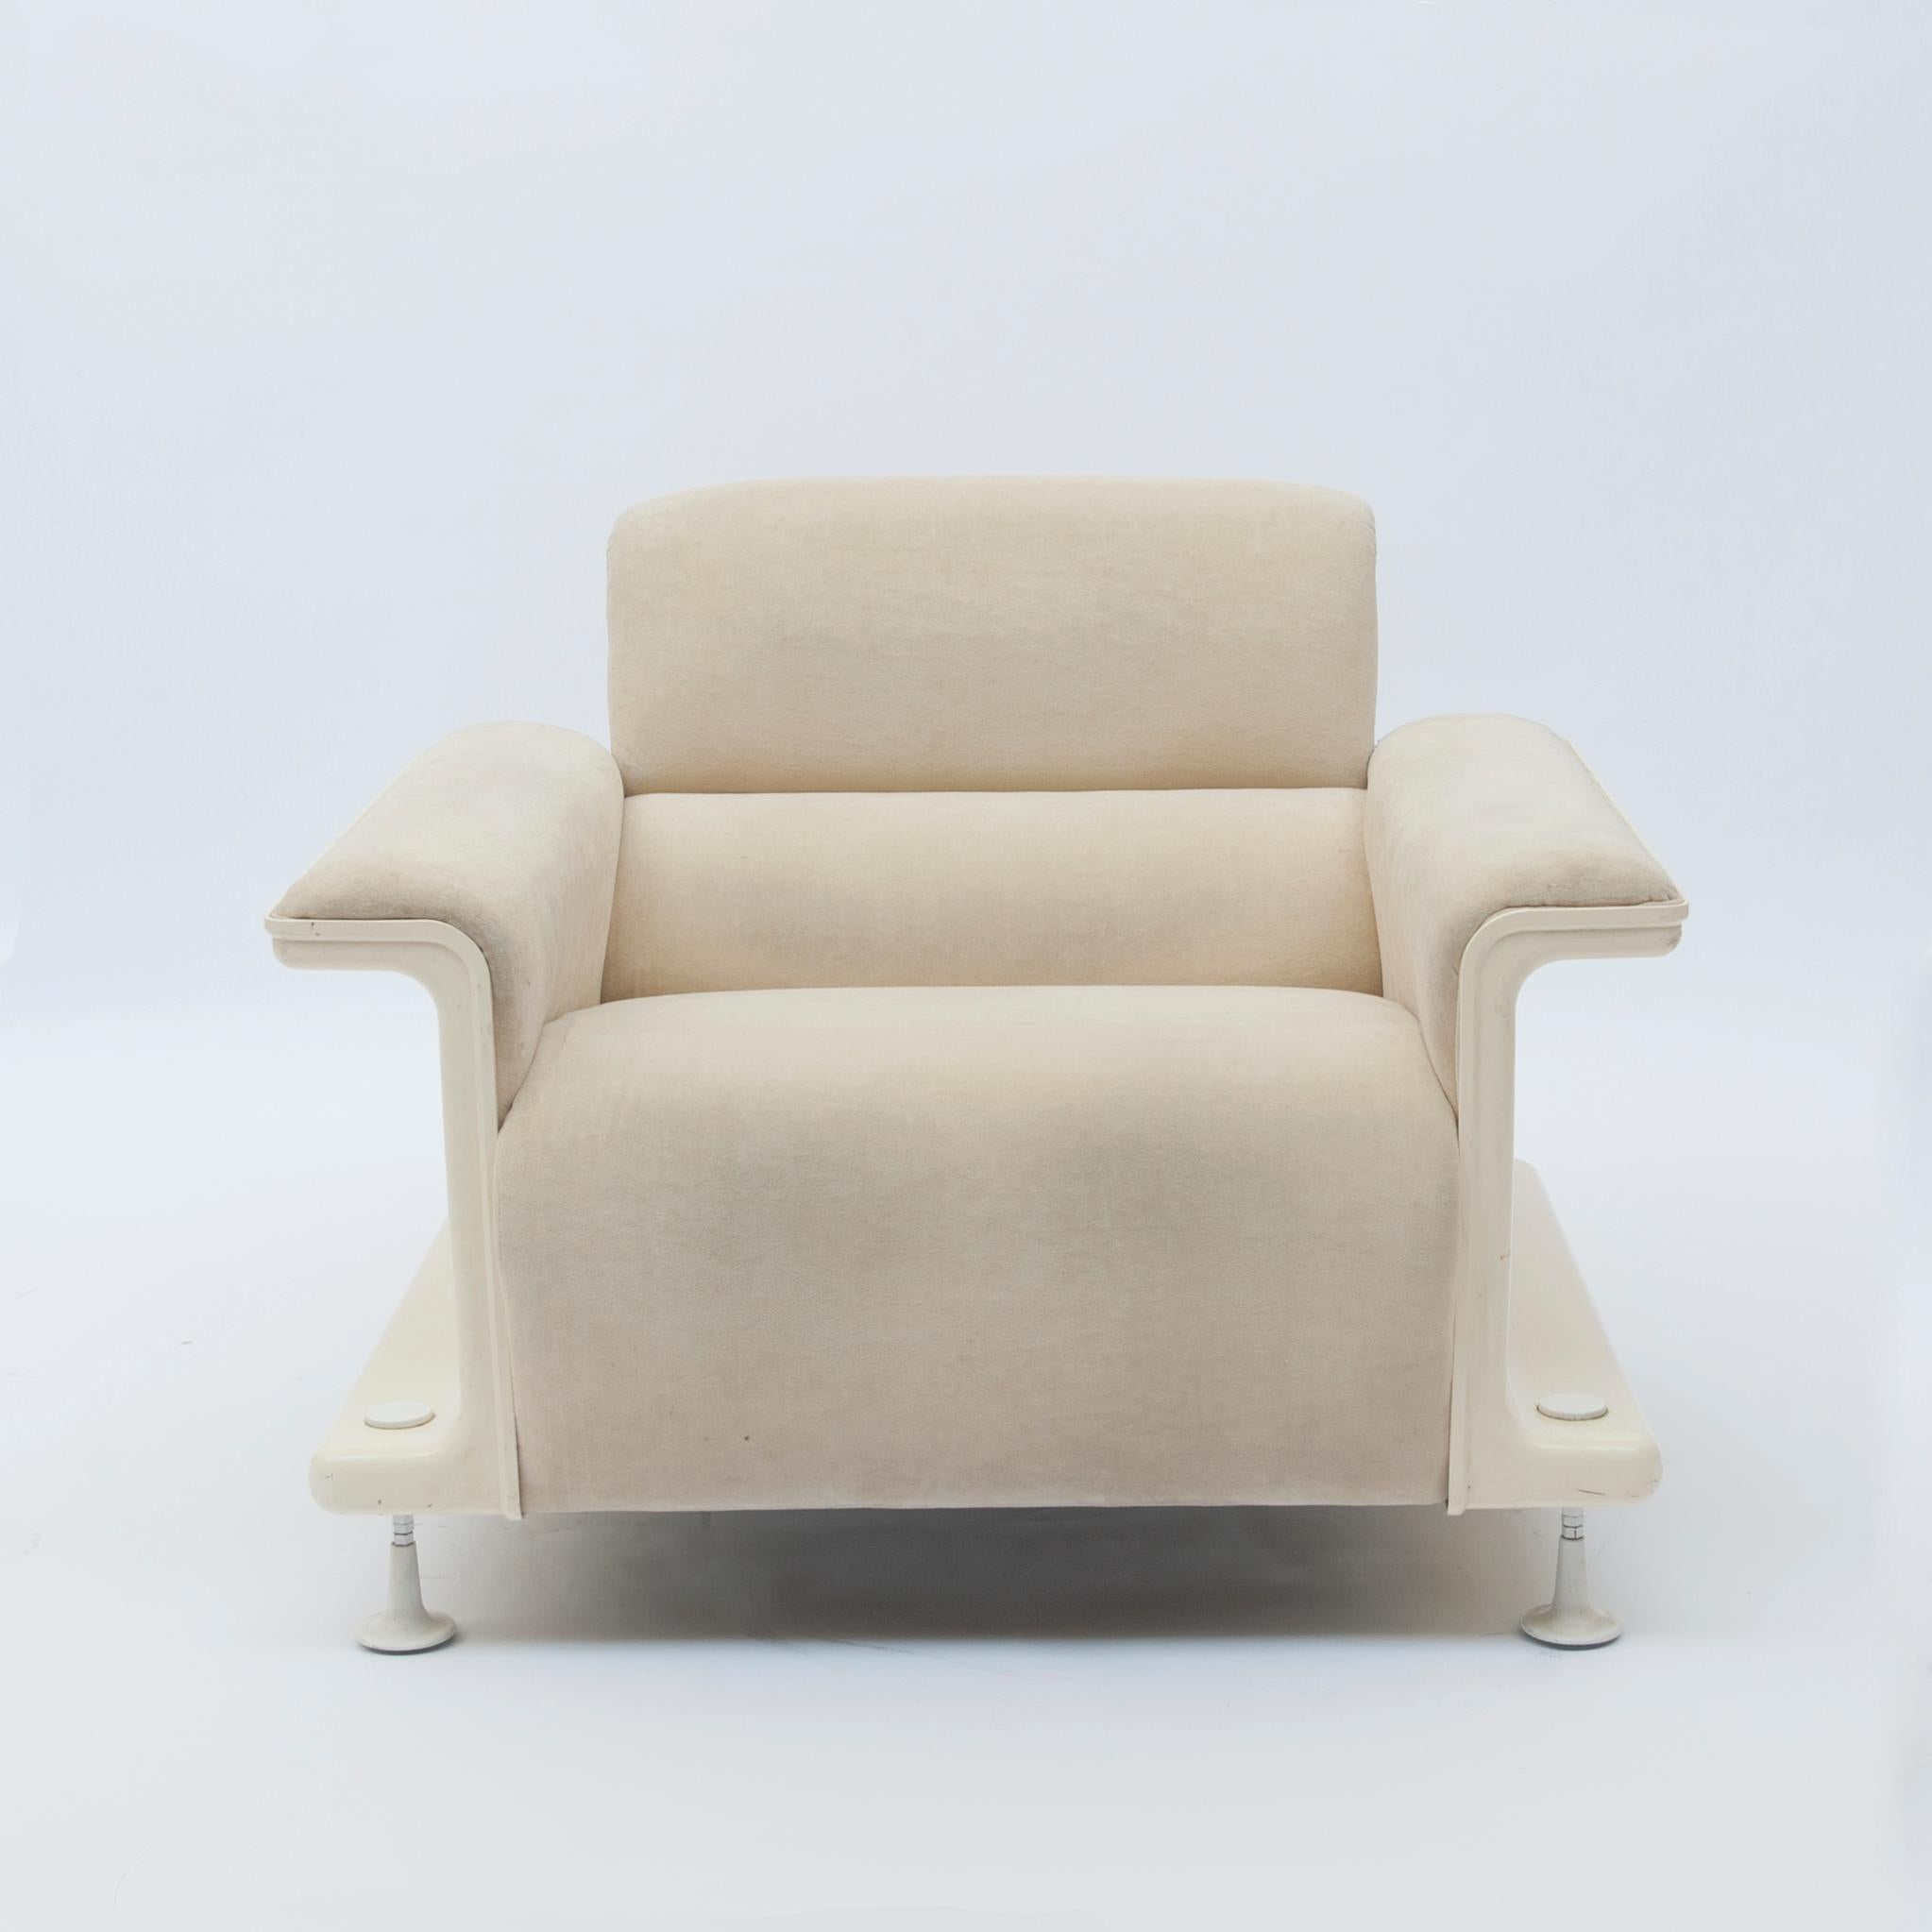 Gerd Lange ‘SZ28' fauteuil for ’t Spectrum. Very rare, with beautiful original velvet fabric. This seating group was designed by Gerd Lange around 1970. The serie is mentioned at the textile museum in Tilburg the Netherlands. Acrylic has some minor